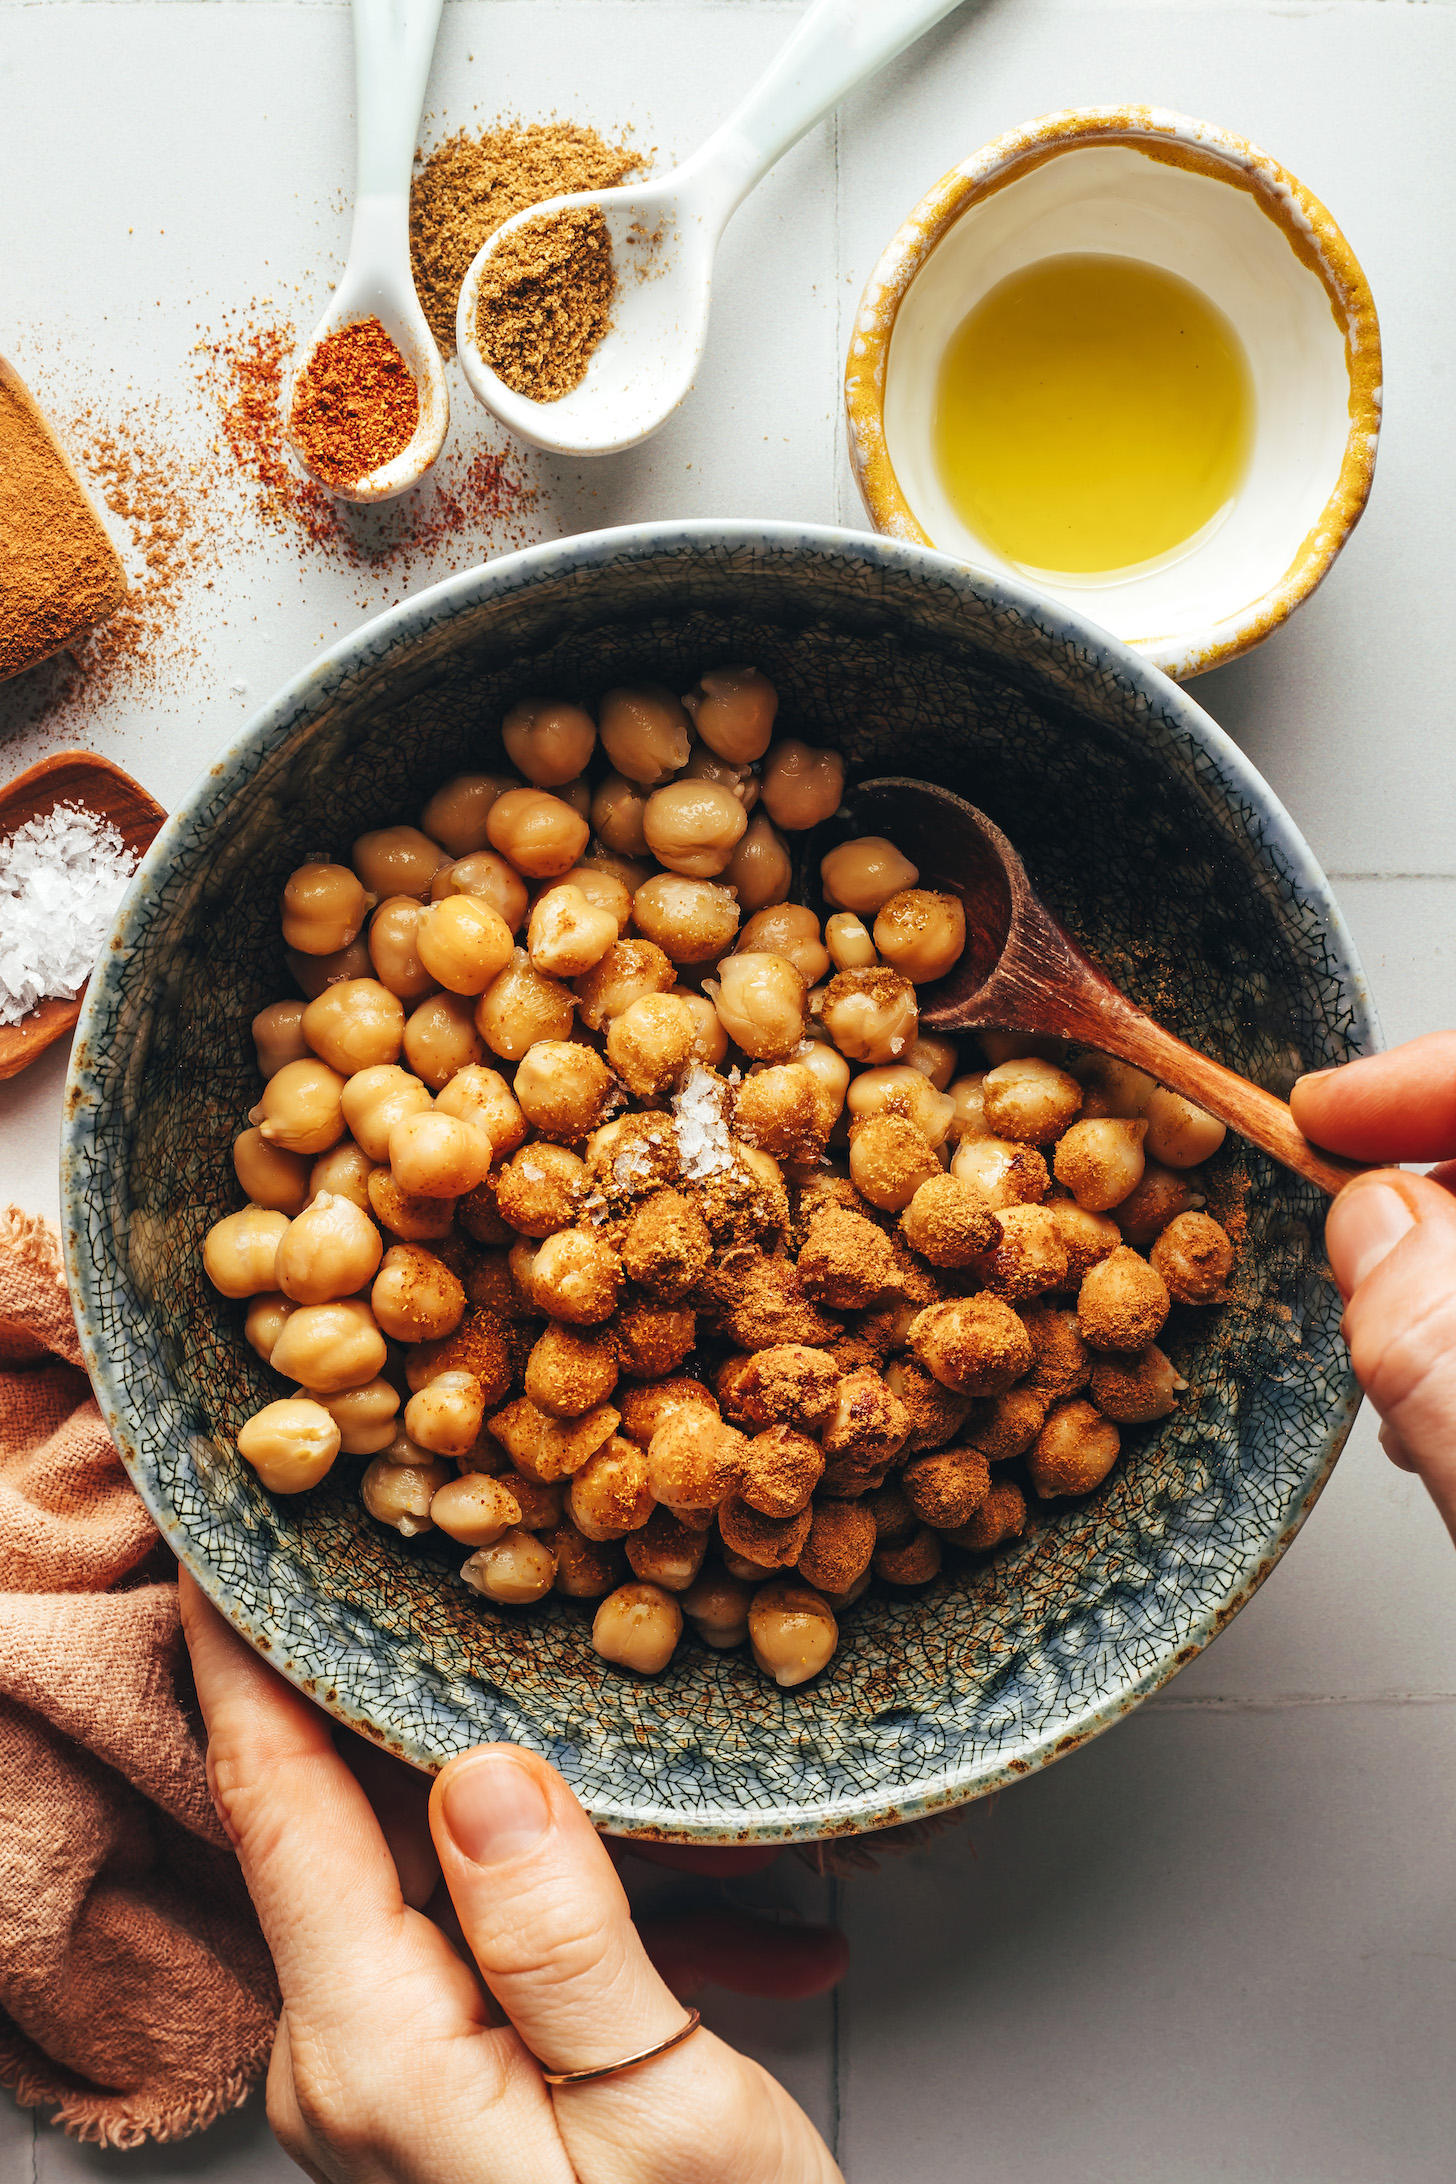 Mix chickpeas with spices and salt in a bowl using a spoon